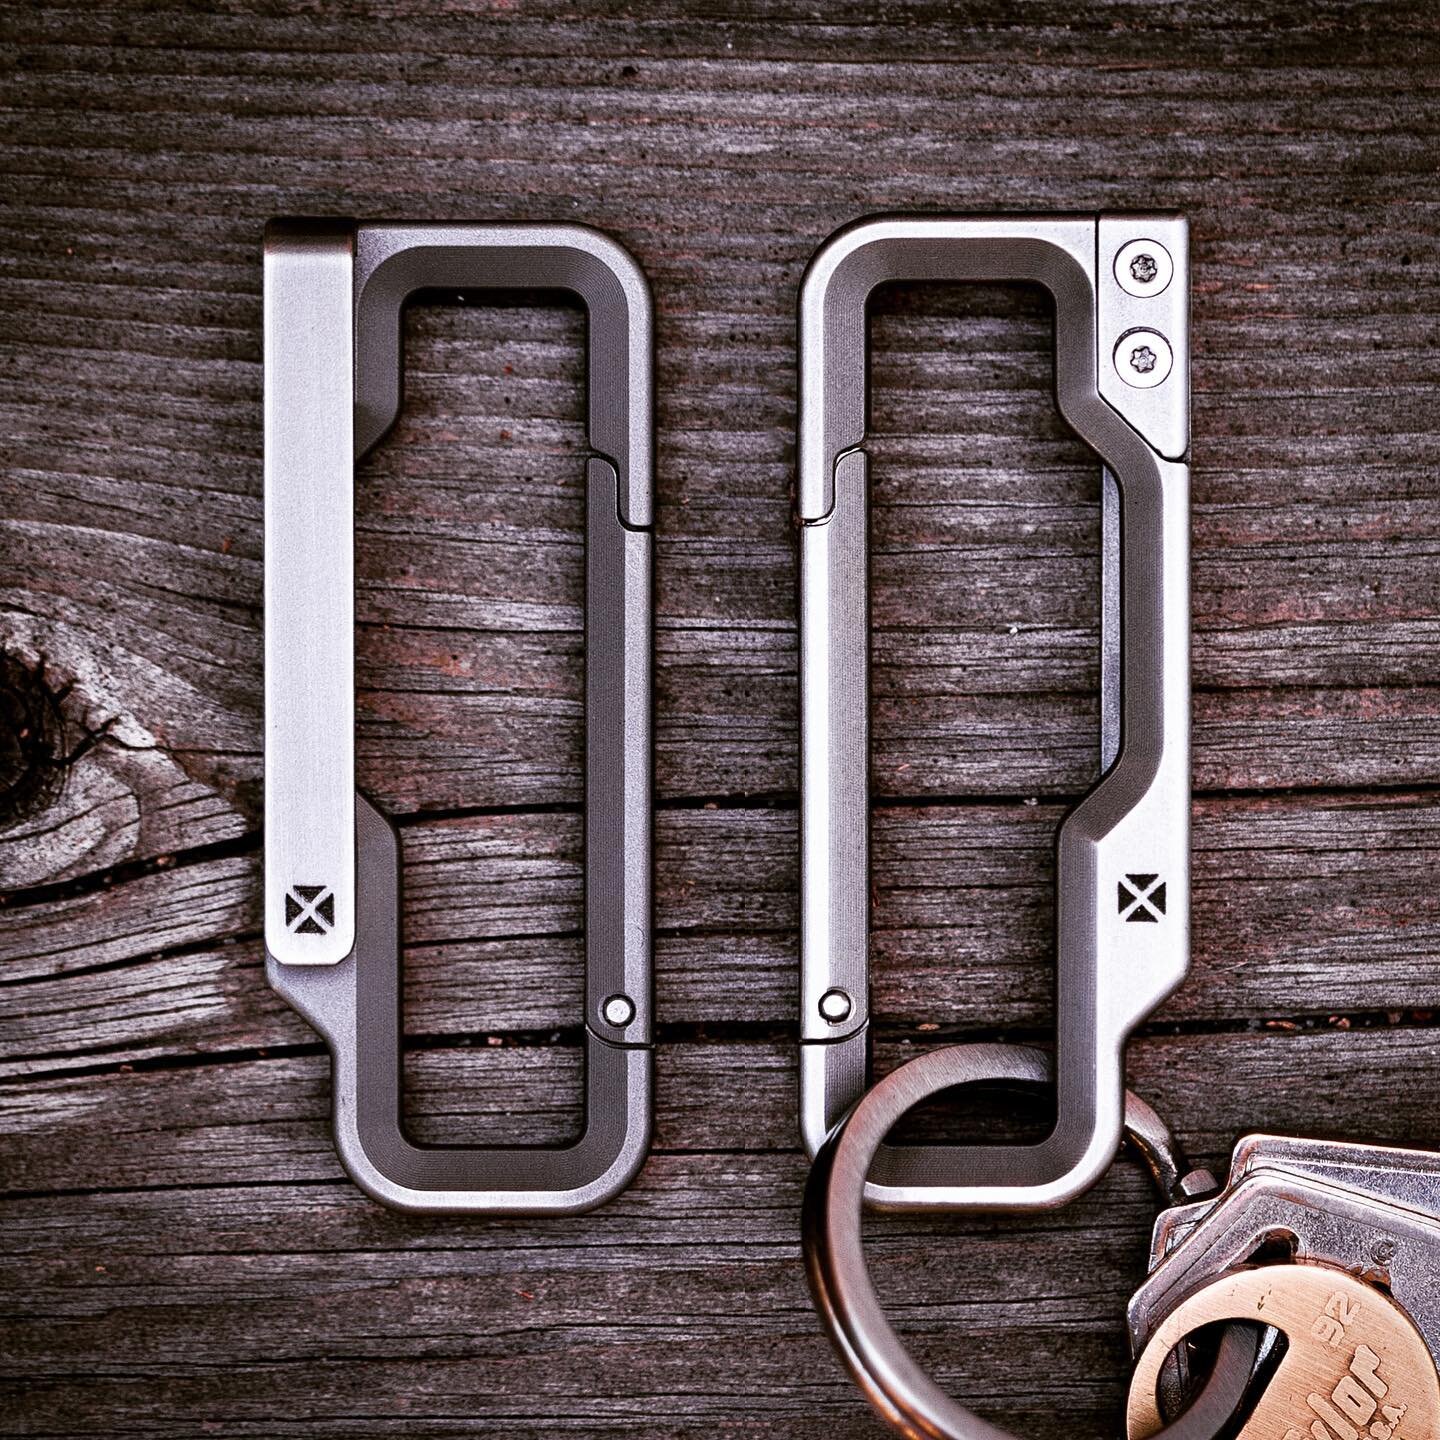 Hi! I just launched HyperLink, the NEW Titanium EDC Carabiner carabiner with a &ldquo;Deep Carry&rdquo; clip, to provide ease of use and more attachment options when attaching it to bags, your pocket, and more. 48 Hour Extra HyperLink Discount - Use 